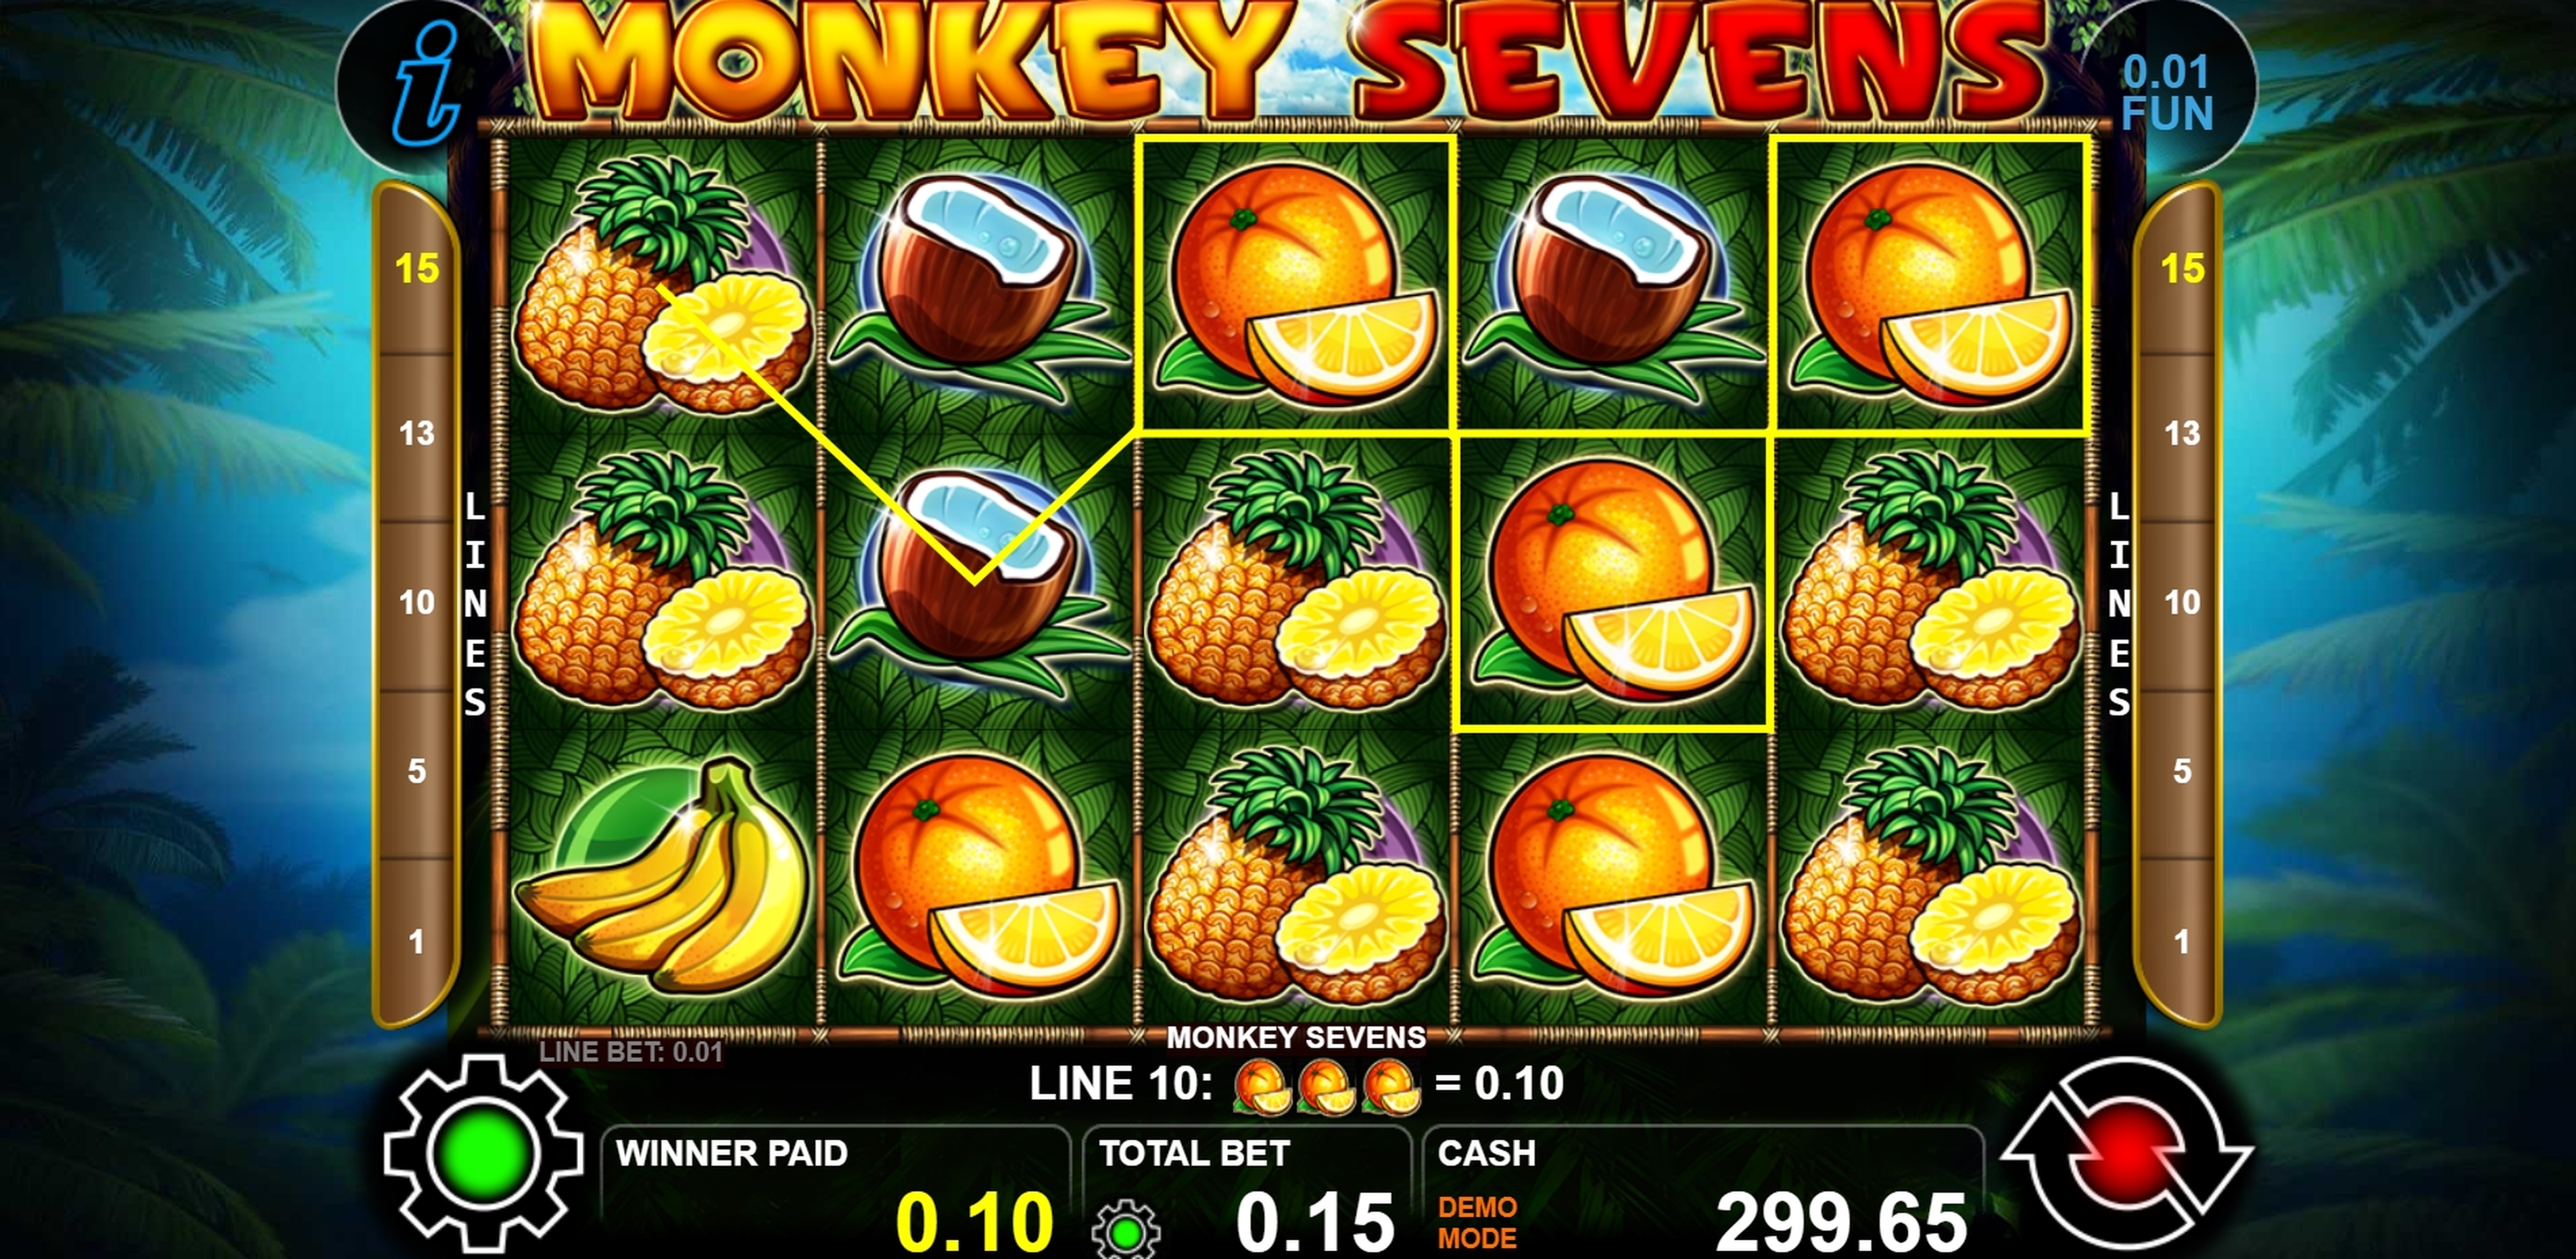 Win Money in Monkey Sevens Free Slot Game by casino technology